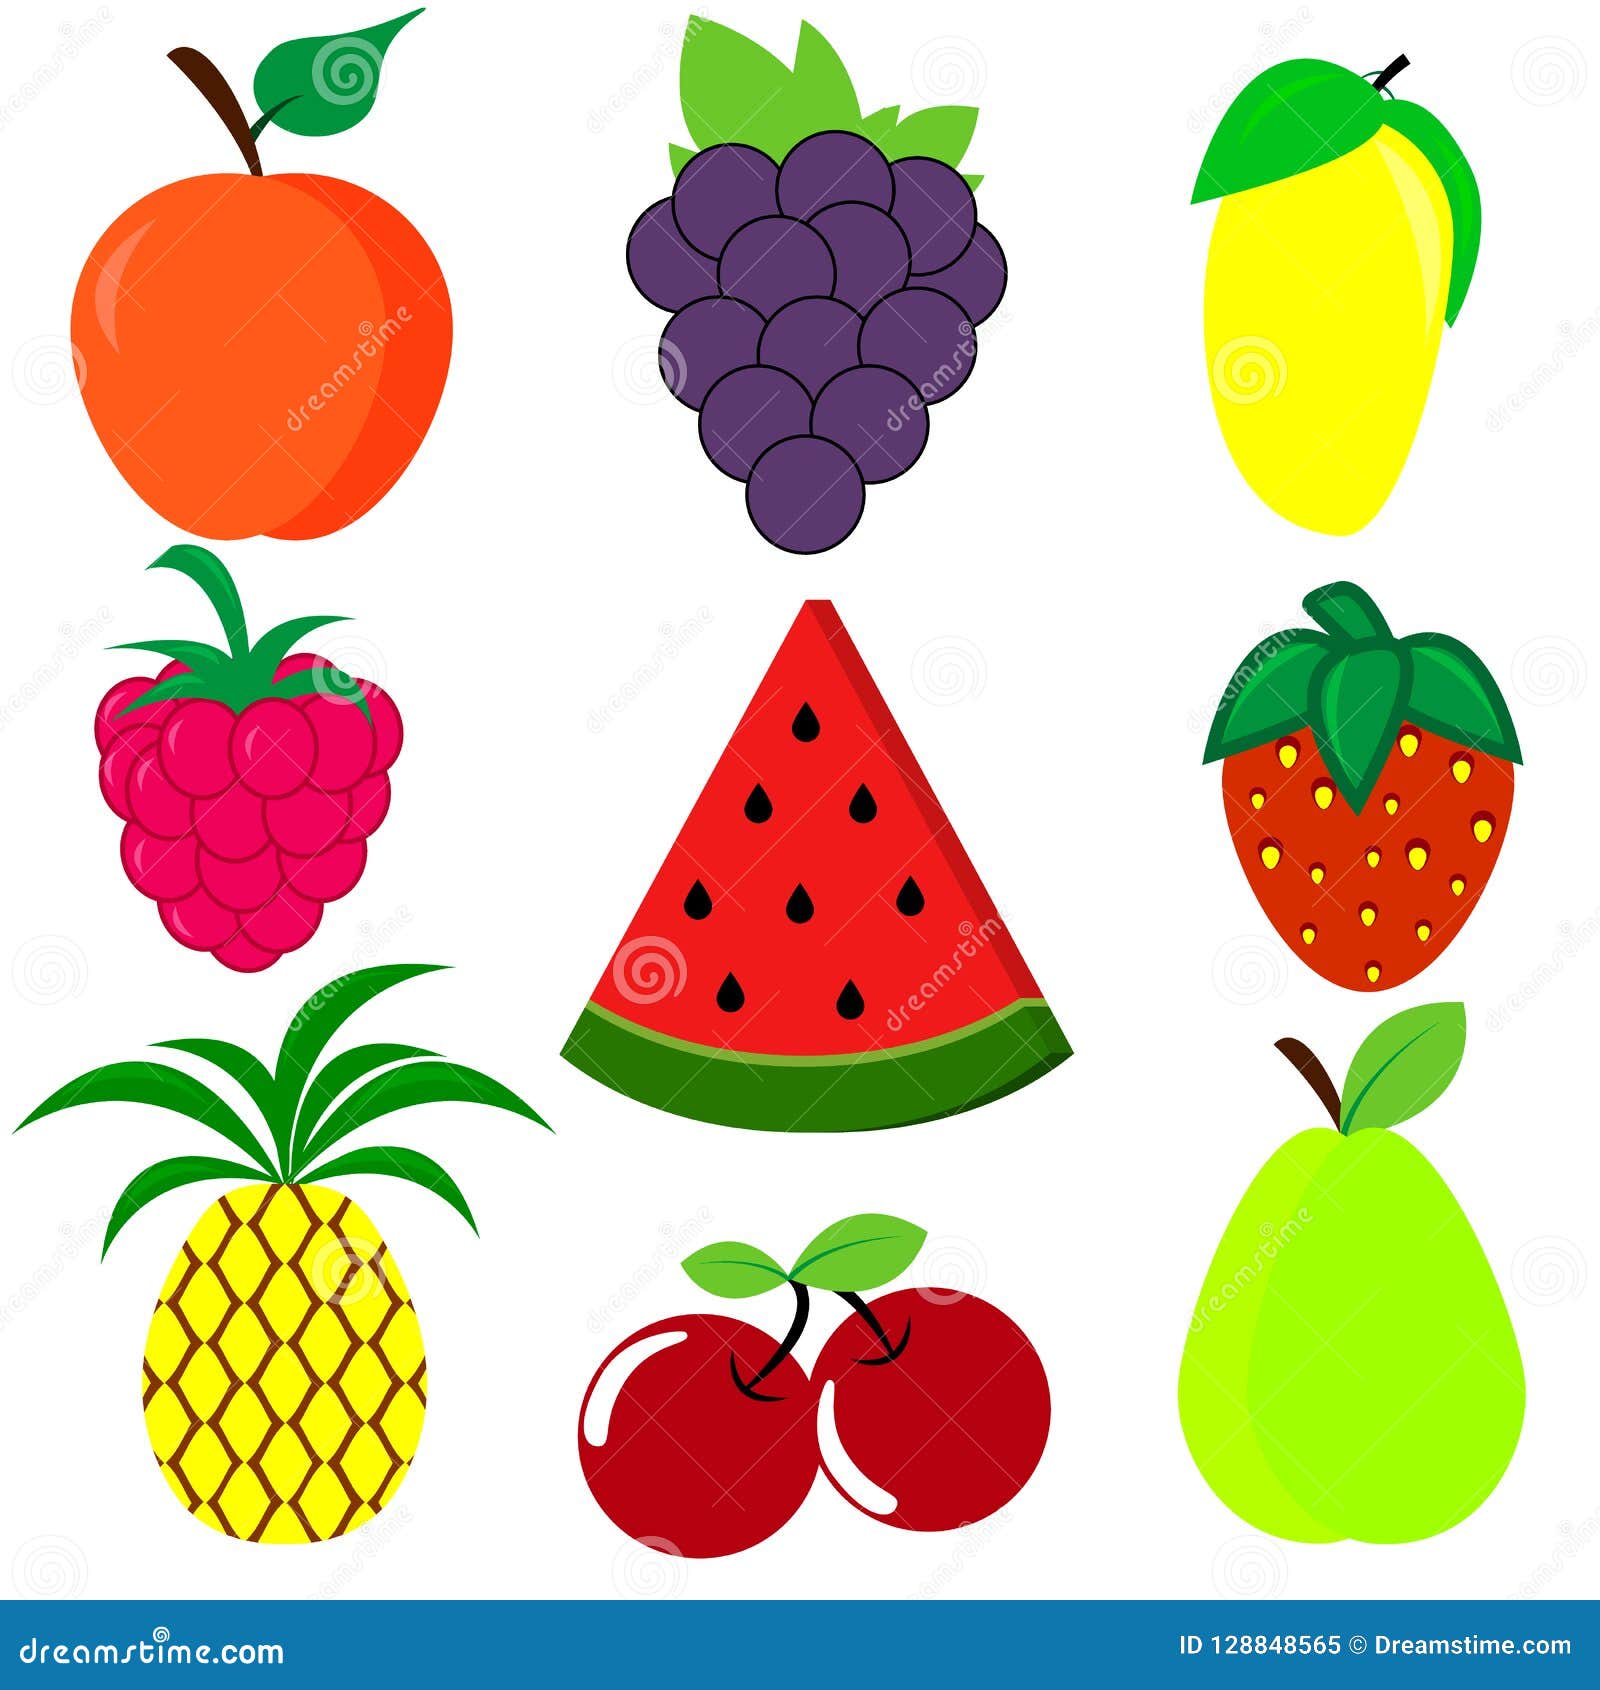 Cute Bright Colors Of Fruits Vector Collections Set Of Cartoon Fruits Stock Illustration Illustration Of Nature Cute